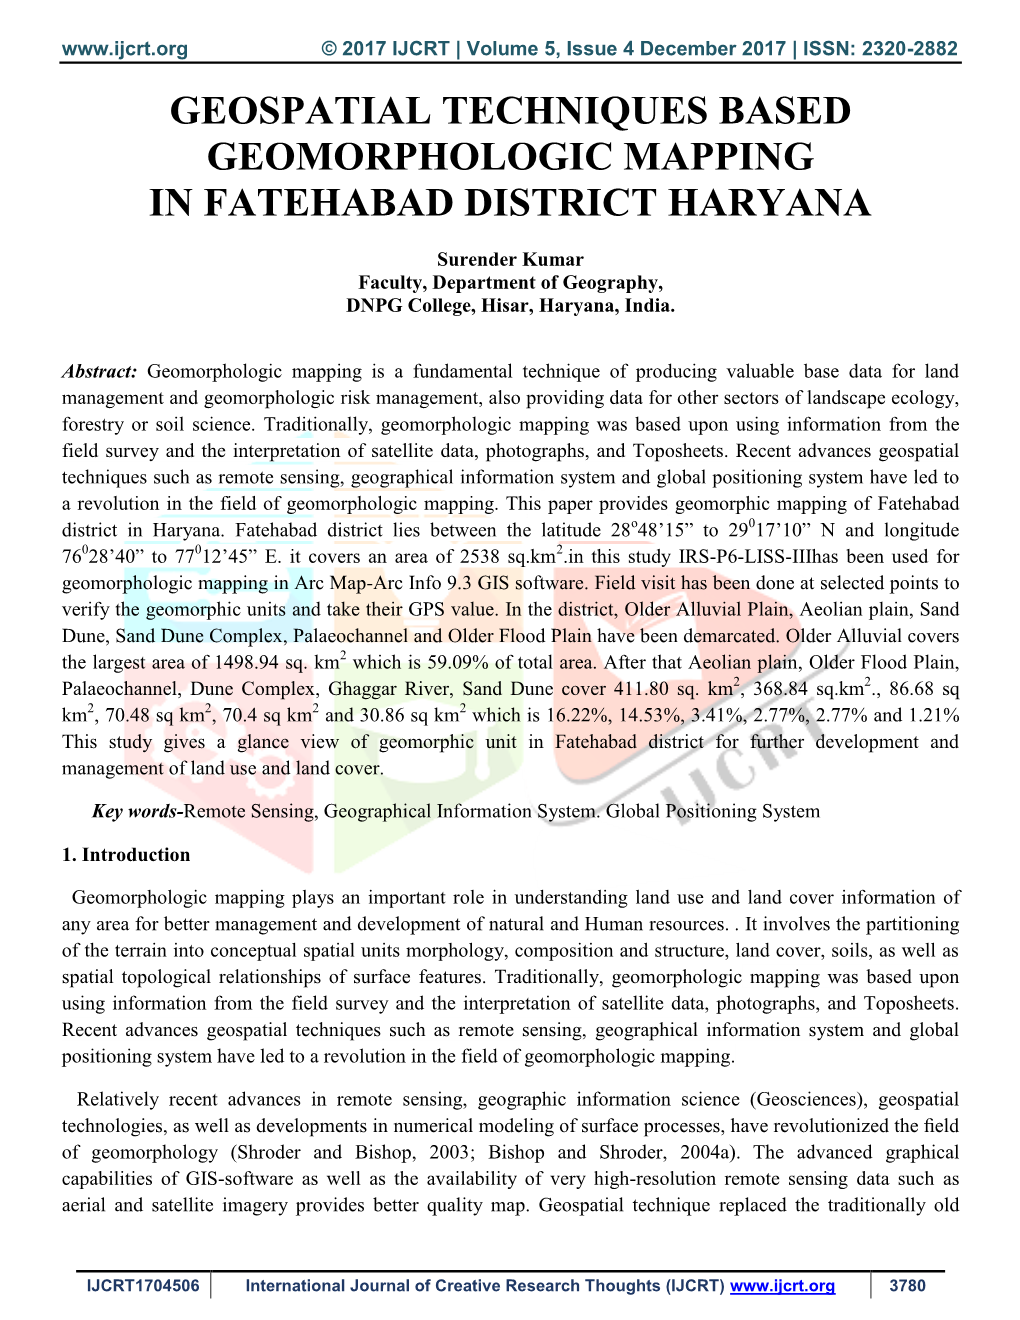 Geospatial Techniques Based Geomorphologic Mapping in Fatehabad District Haryana